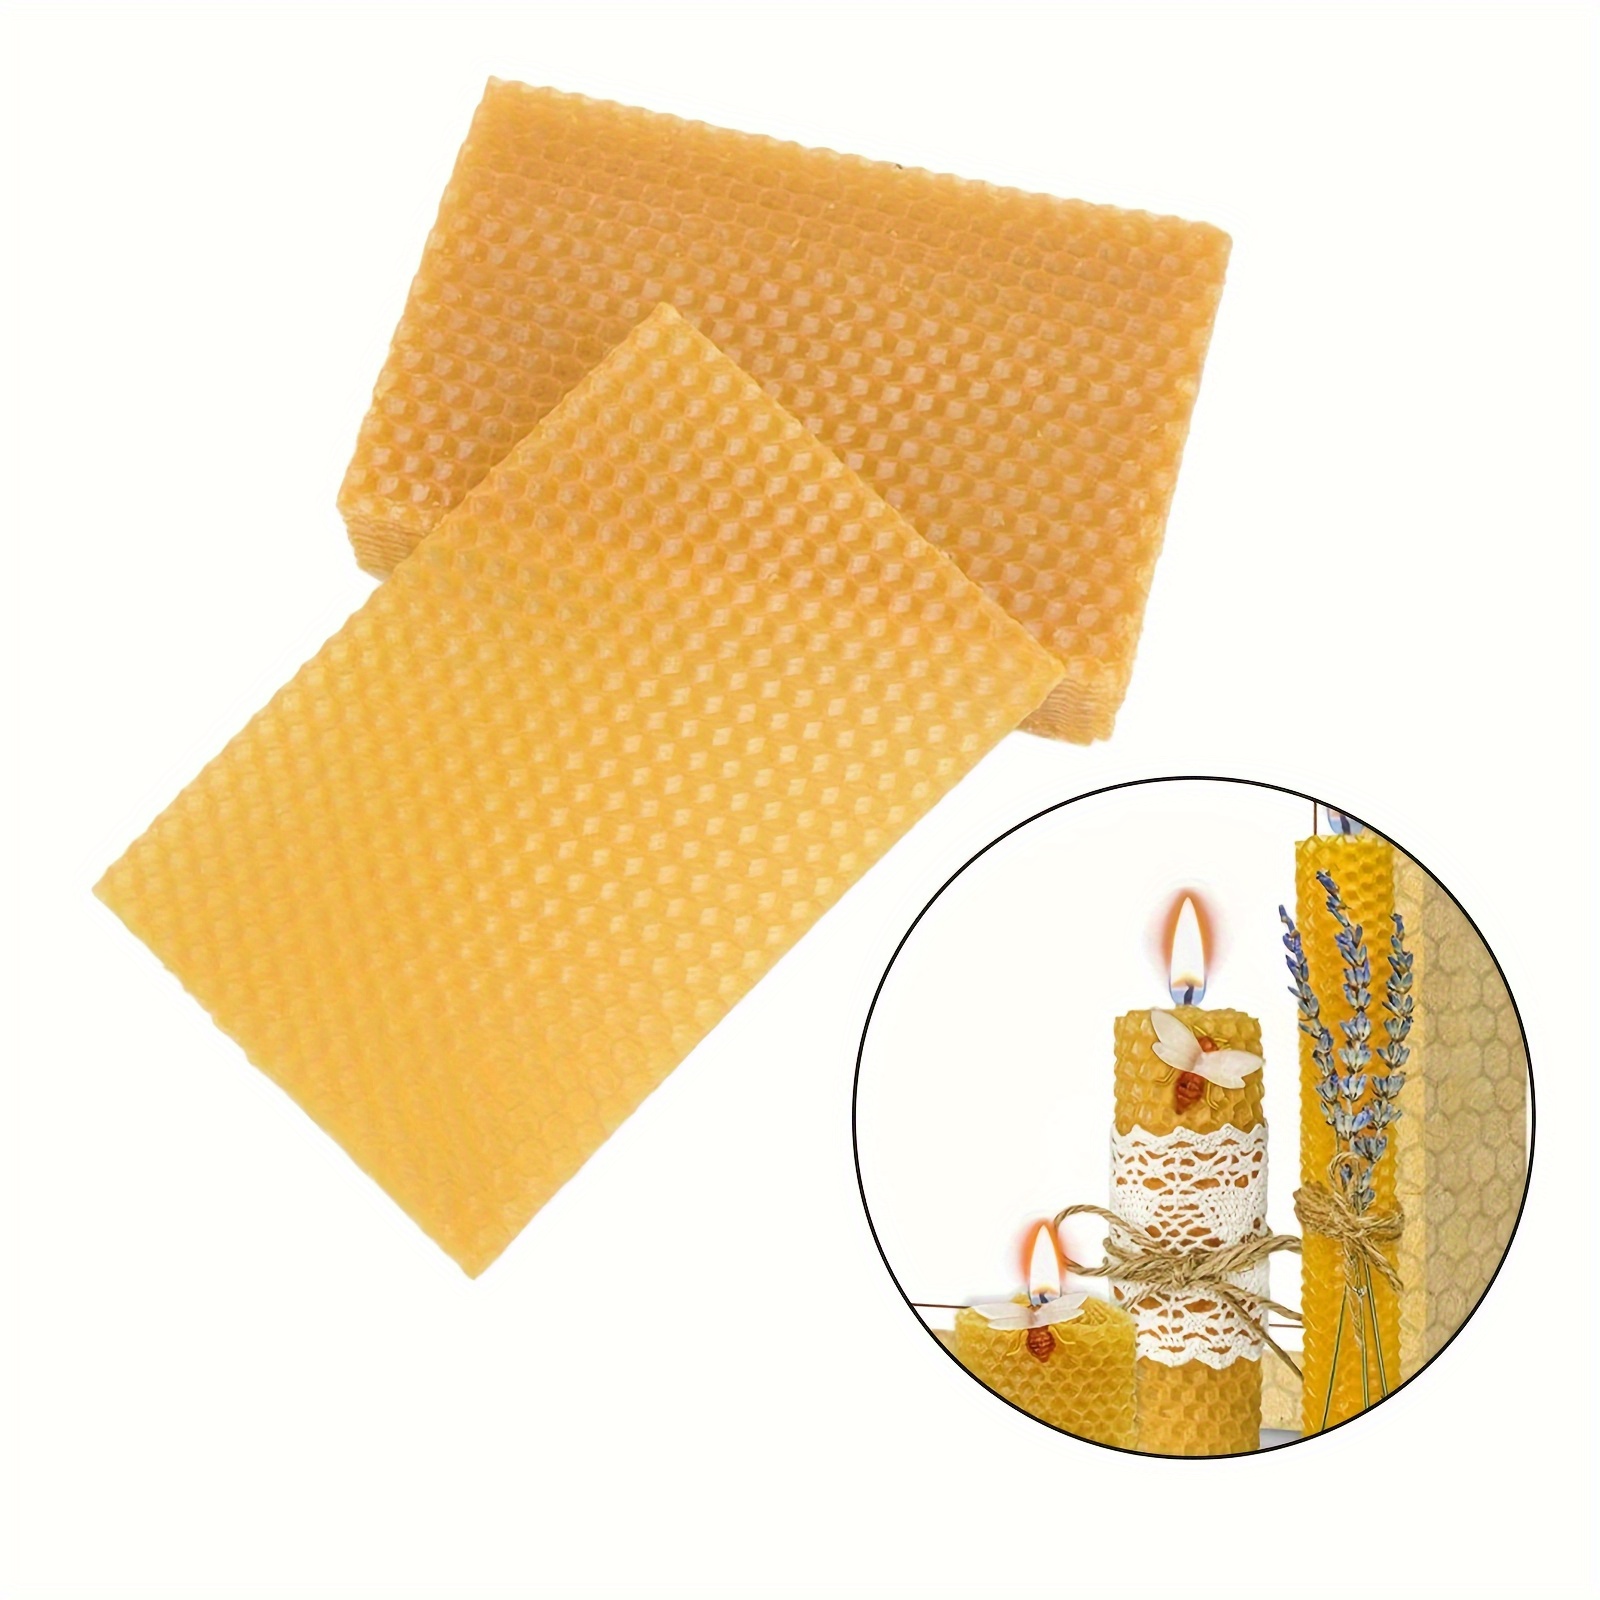 Natural Beeswax Block Bees Wax Candle Making, Beeswax For Candle